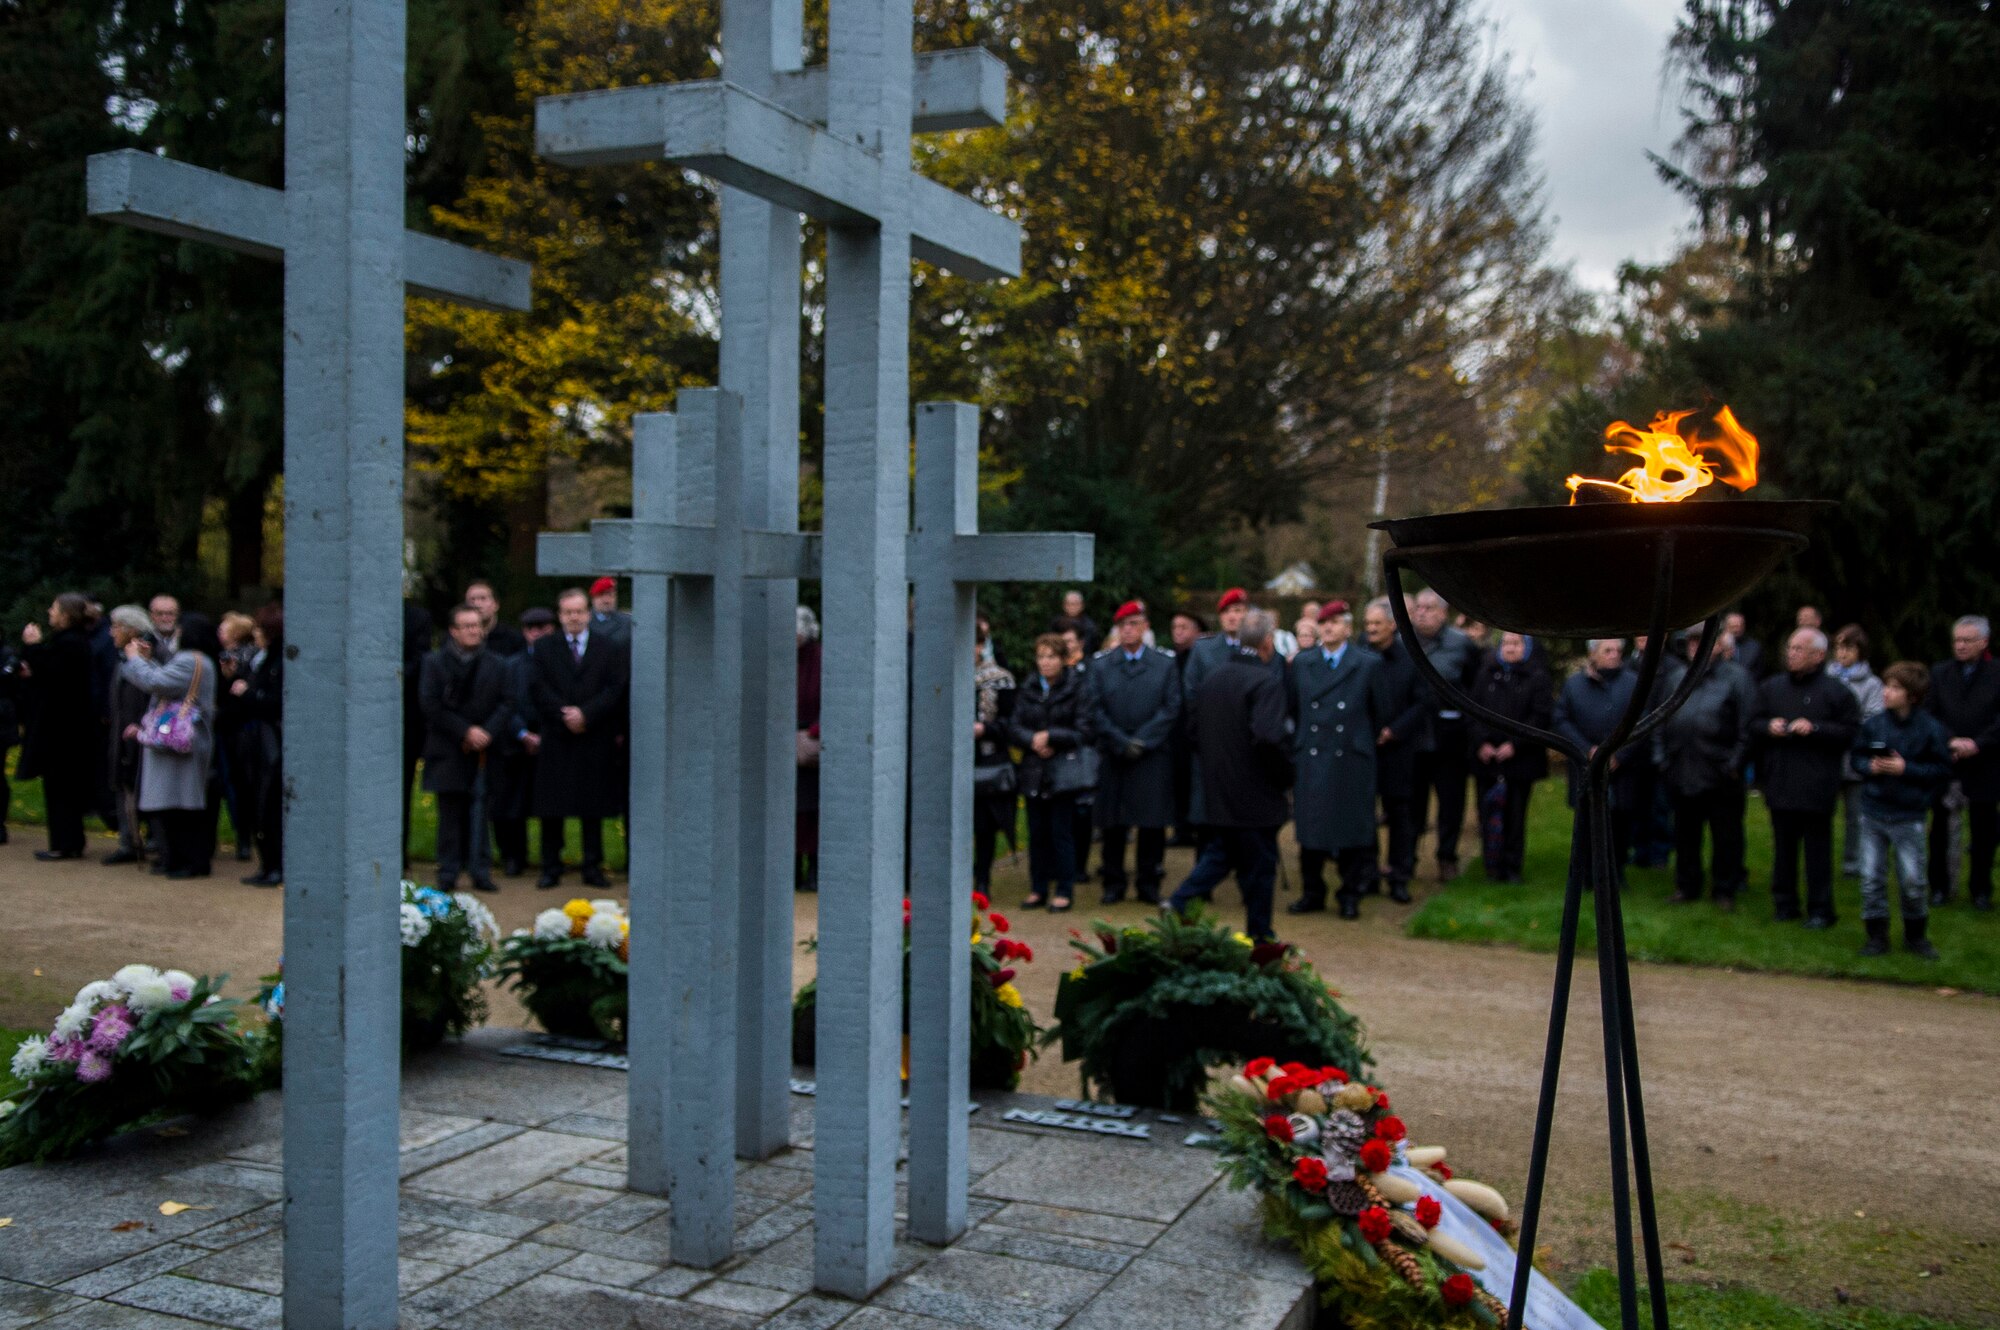 A German memorial faces a crowd during a National Mourning Day ceremony at a cemetery in Trier, Germany, Nov. 15, 2015. The memorial was the location of a ceremony for Germany’s National Mourning Day. (U.S. Air Force photo by Airman 1st Class Luke Kitterman/Released)